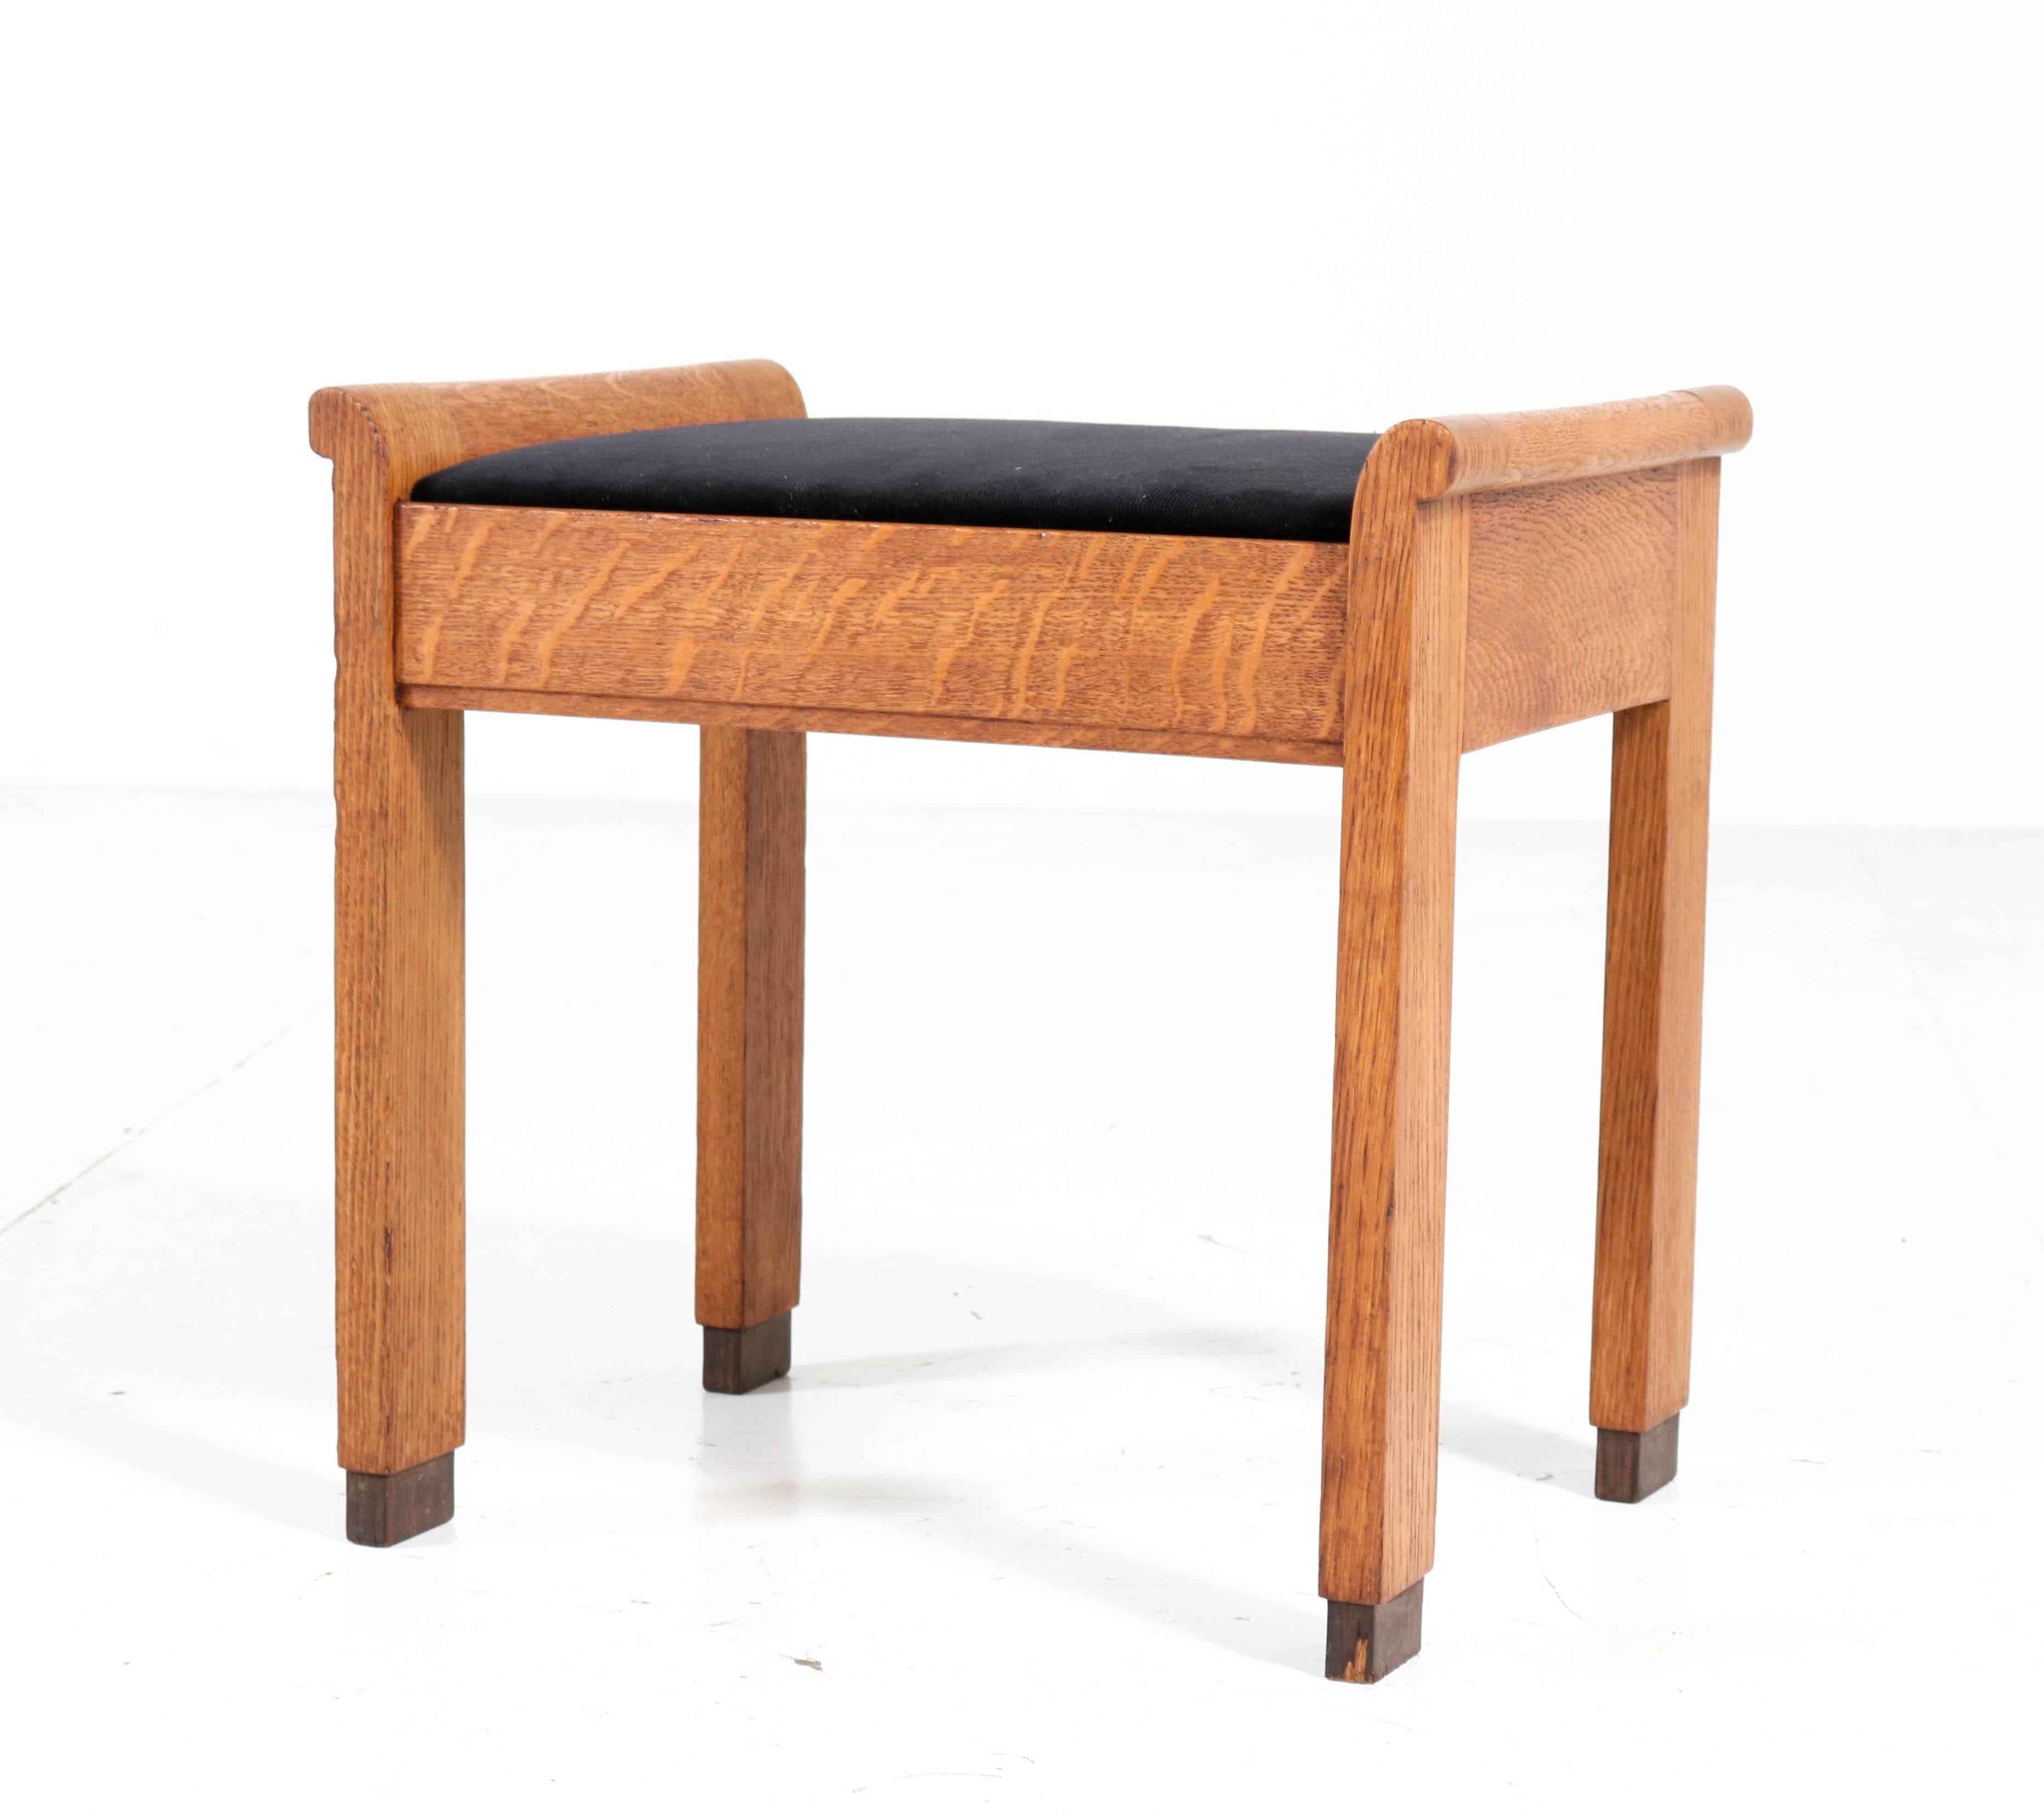 Stunning Art Deco Haagse School stool.
Design by J.A. Muntendam for L.O.V. Oosterbeek.
Striking Dutch design from the 1920s.
Solid oak frame with re-upholstered black Manchester corduroy fabric.
In very good condition with minor wear consistent